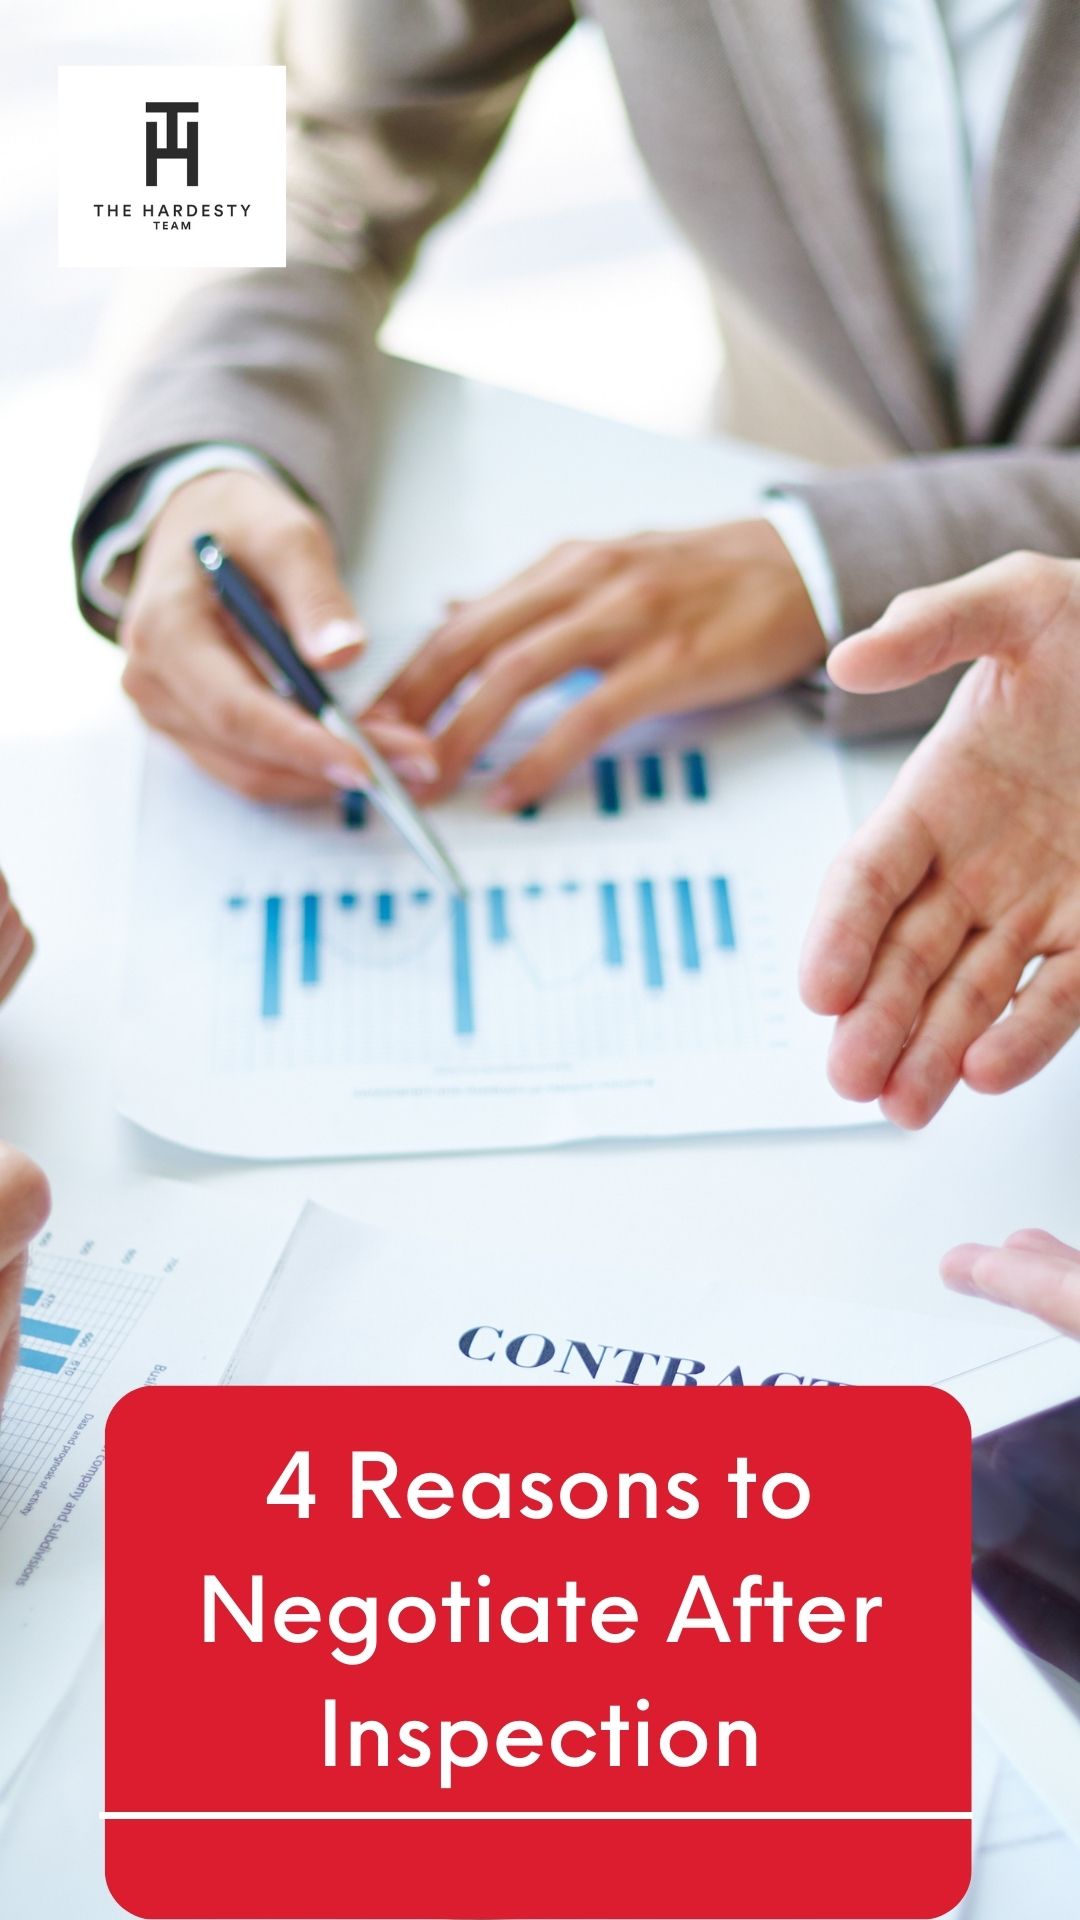 4 Reasons to Negotiate After Inspection